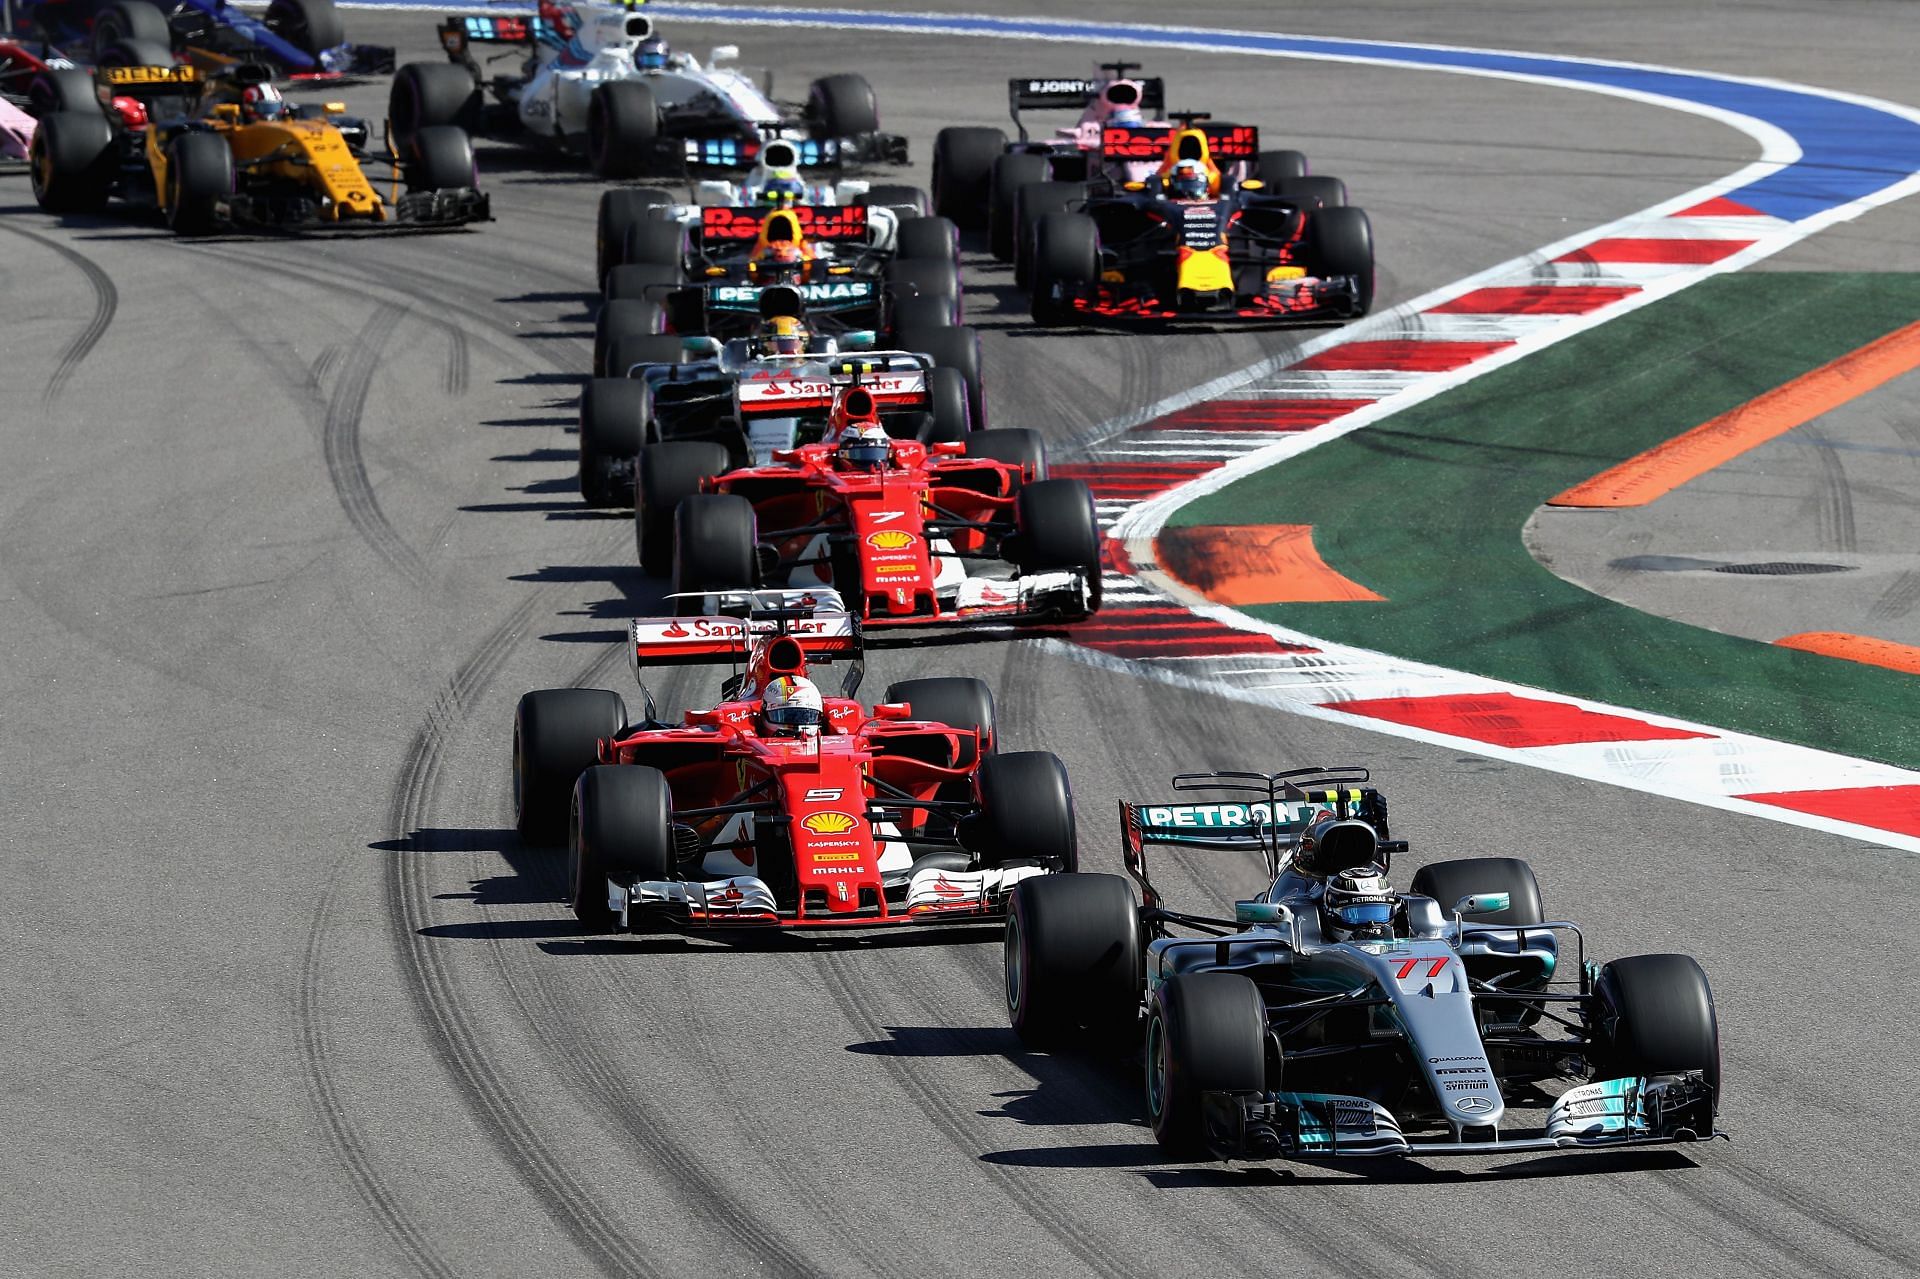 F1 Grand Prix of Russia - The grid takes on a chicane in Sochi